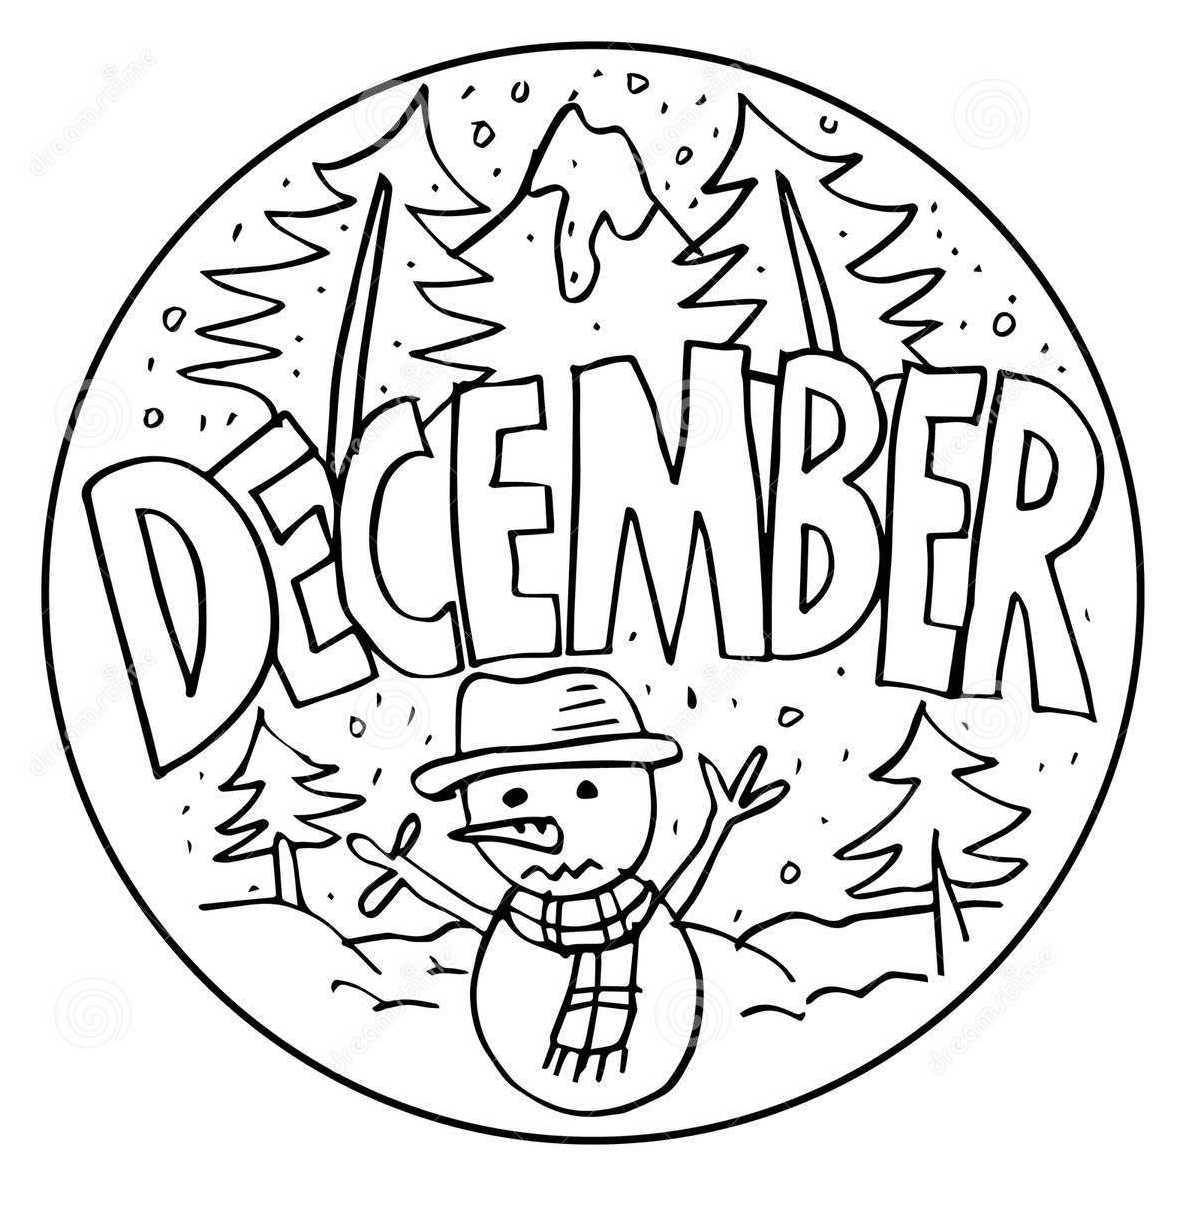 December With Snowman Coloring Pages